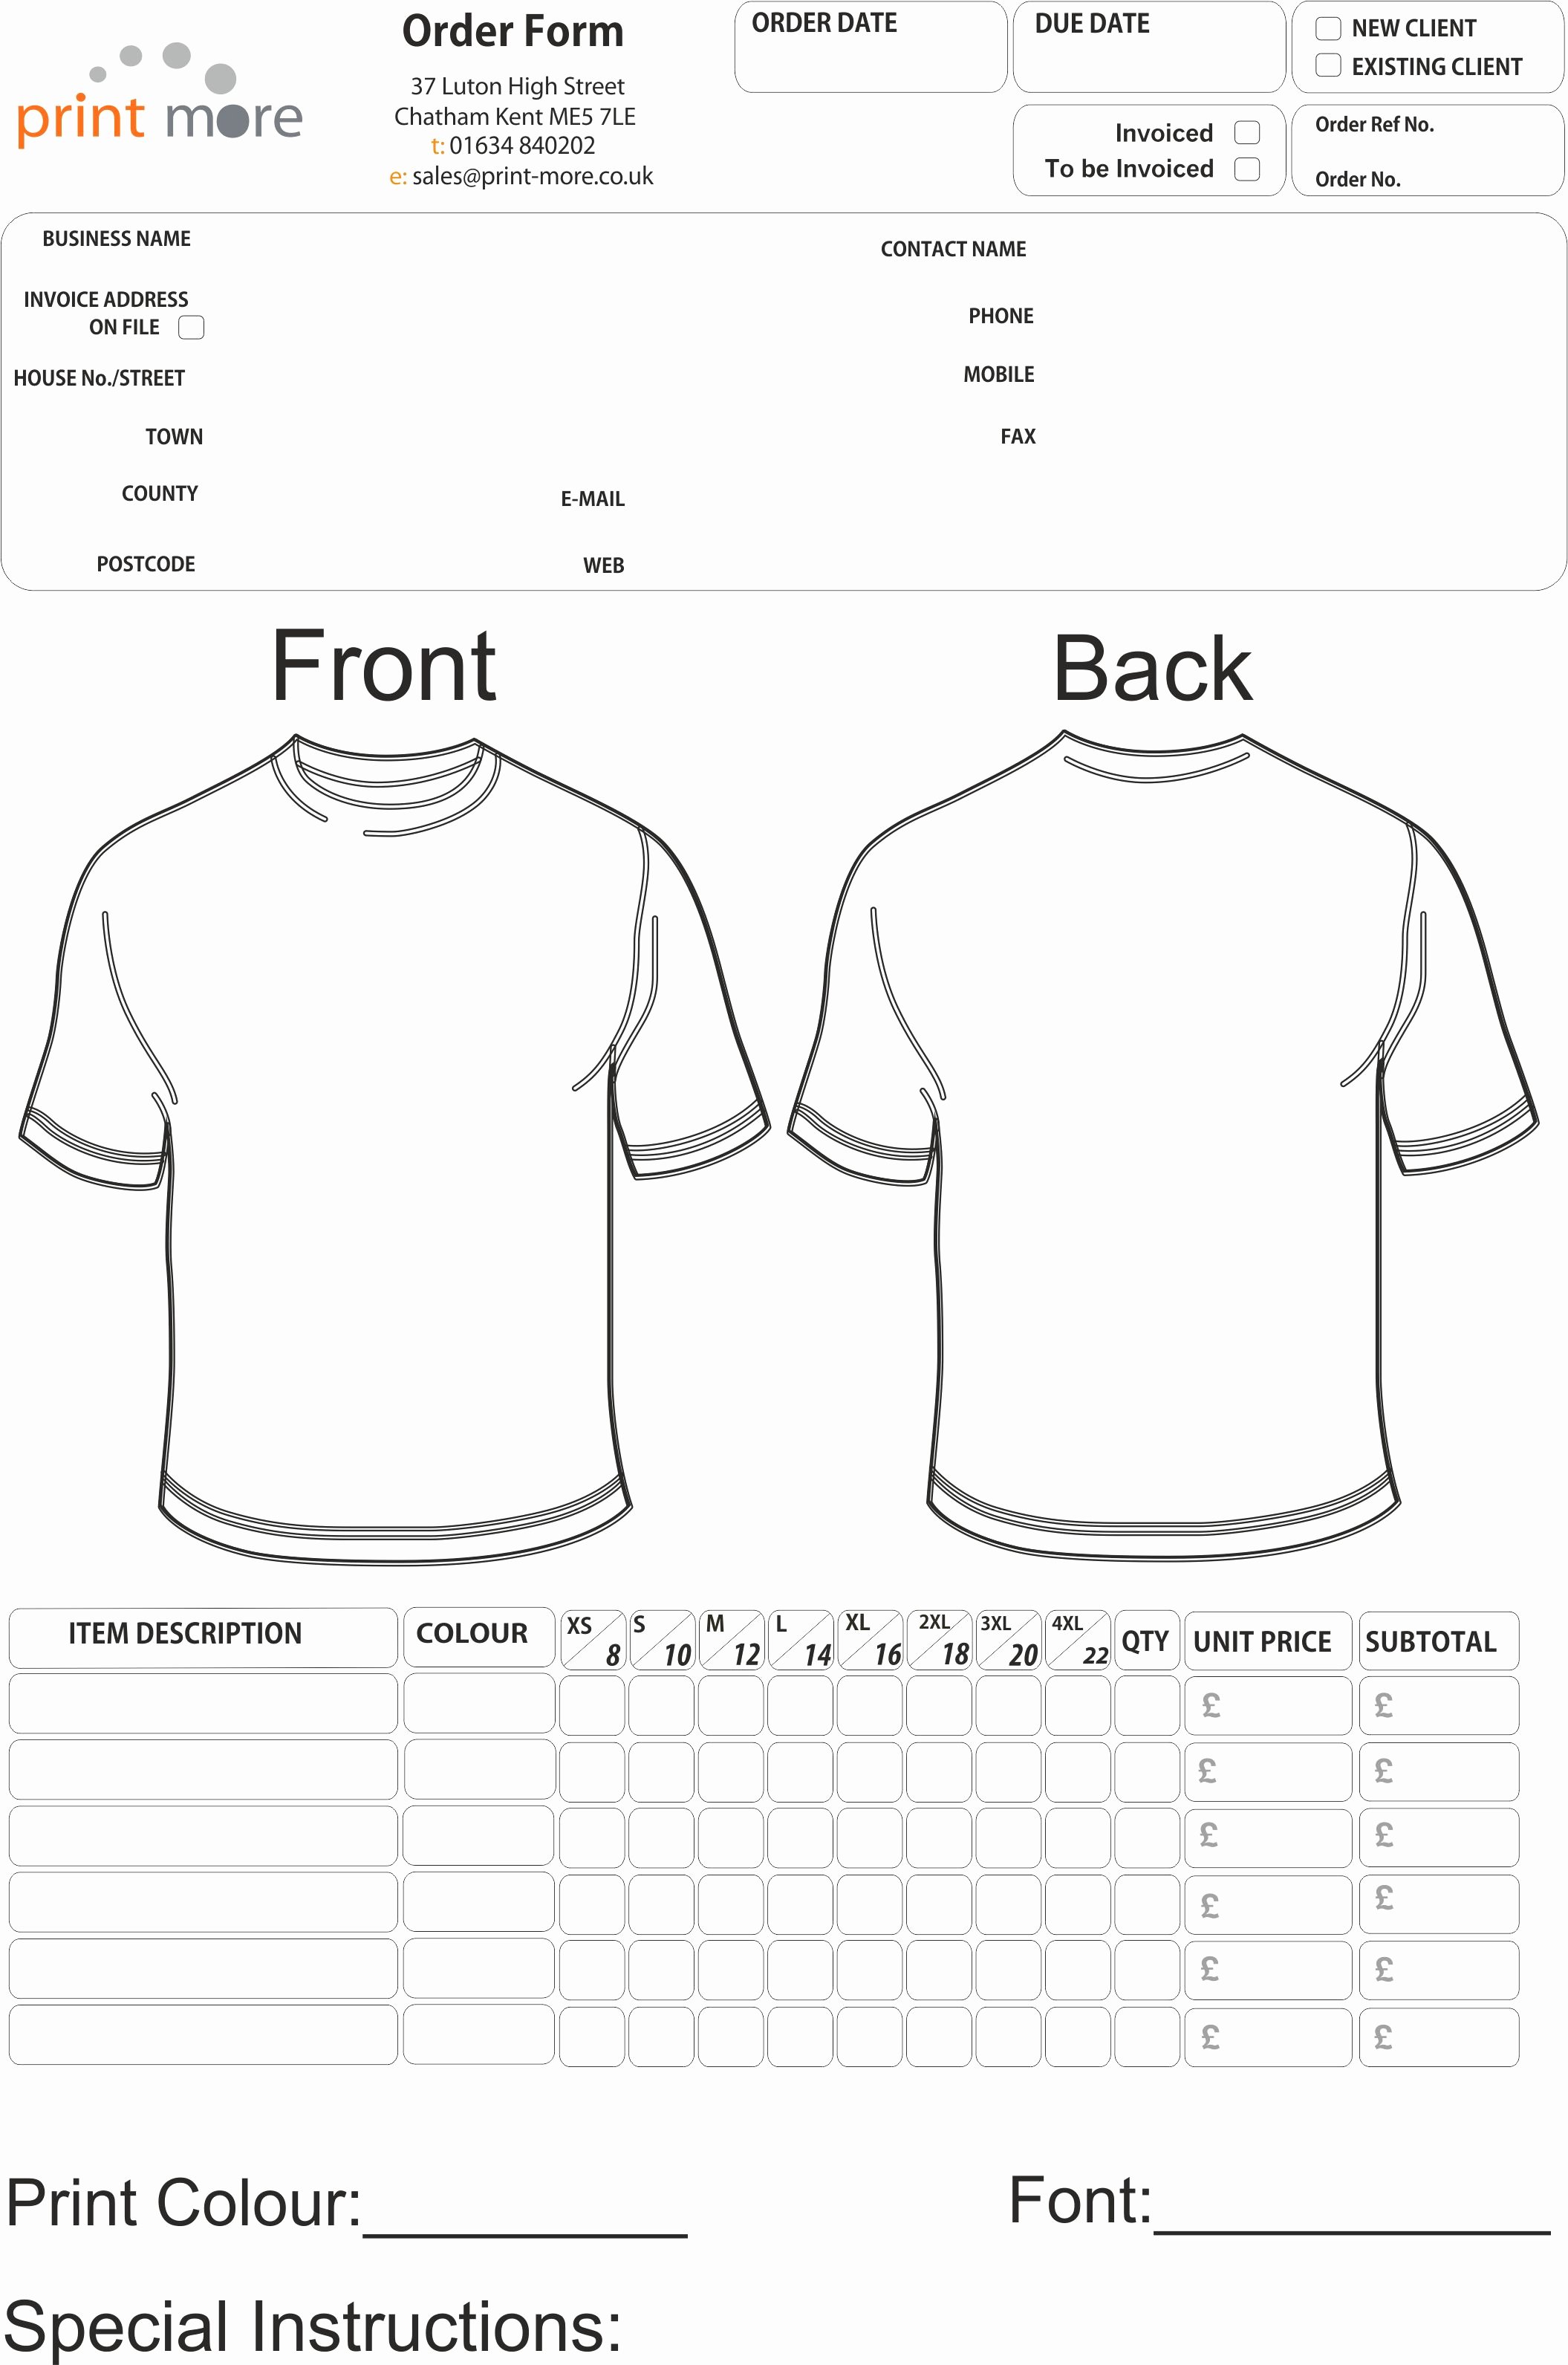 Pre order form Template Lovely T Shirt order form Template